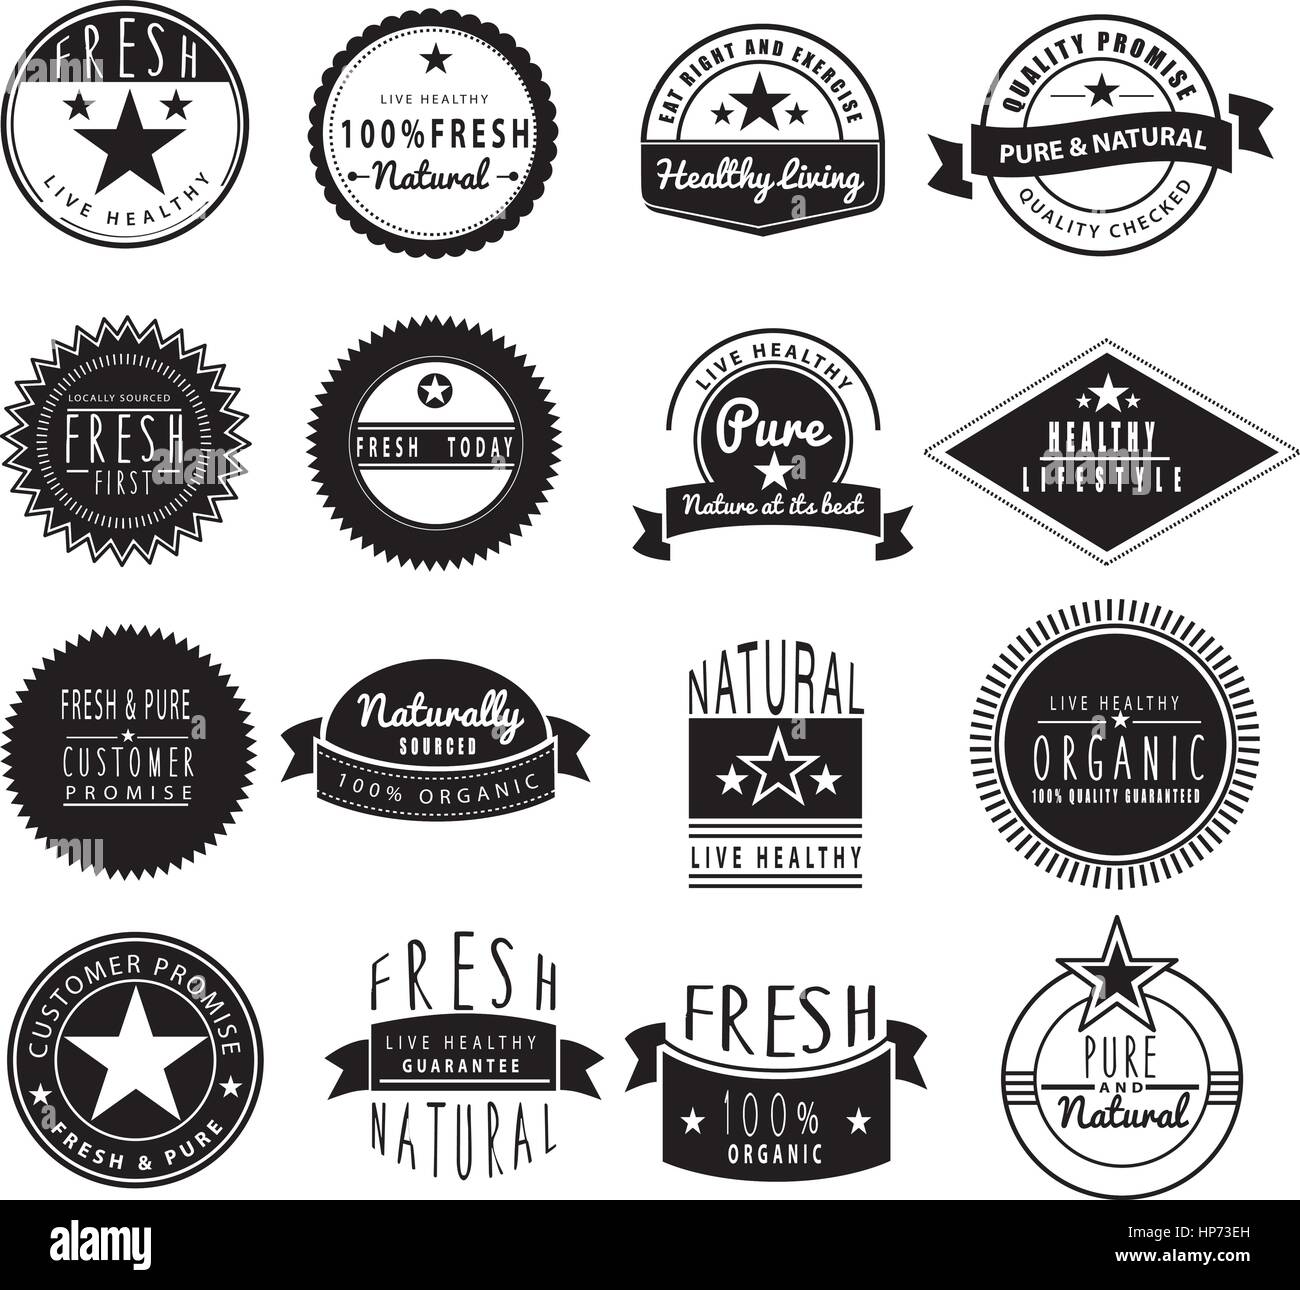 VECTOR TEMPLATE SET OF VINTAGE AND RETRO THEMED LOGO DESIGNS Stock Vector